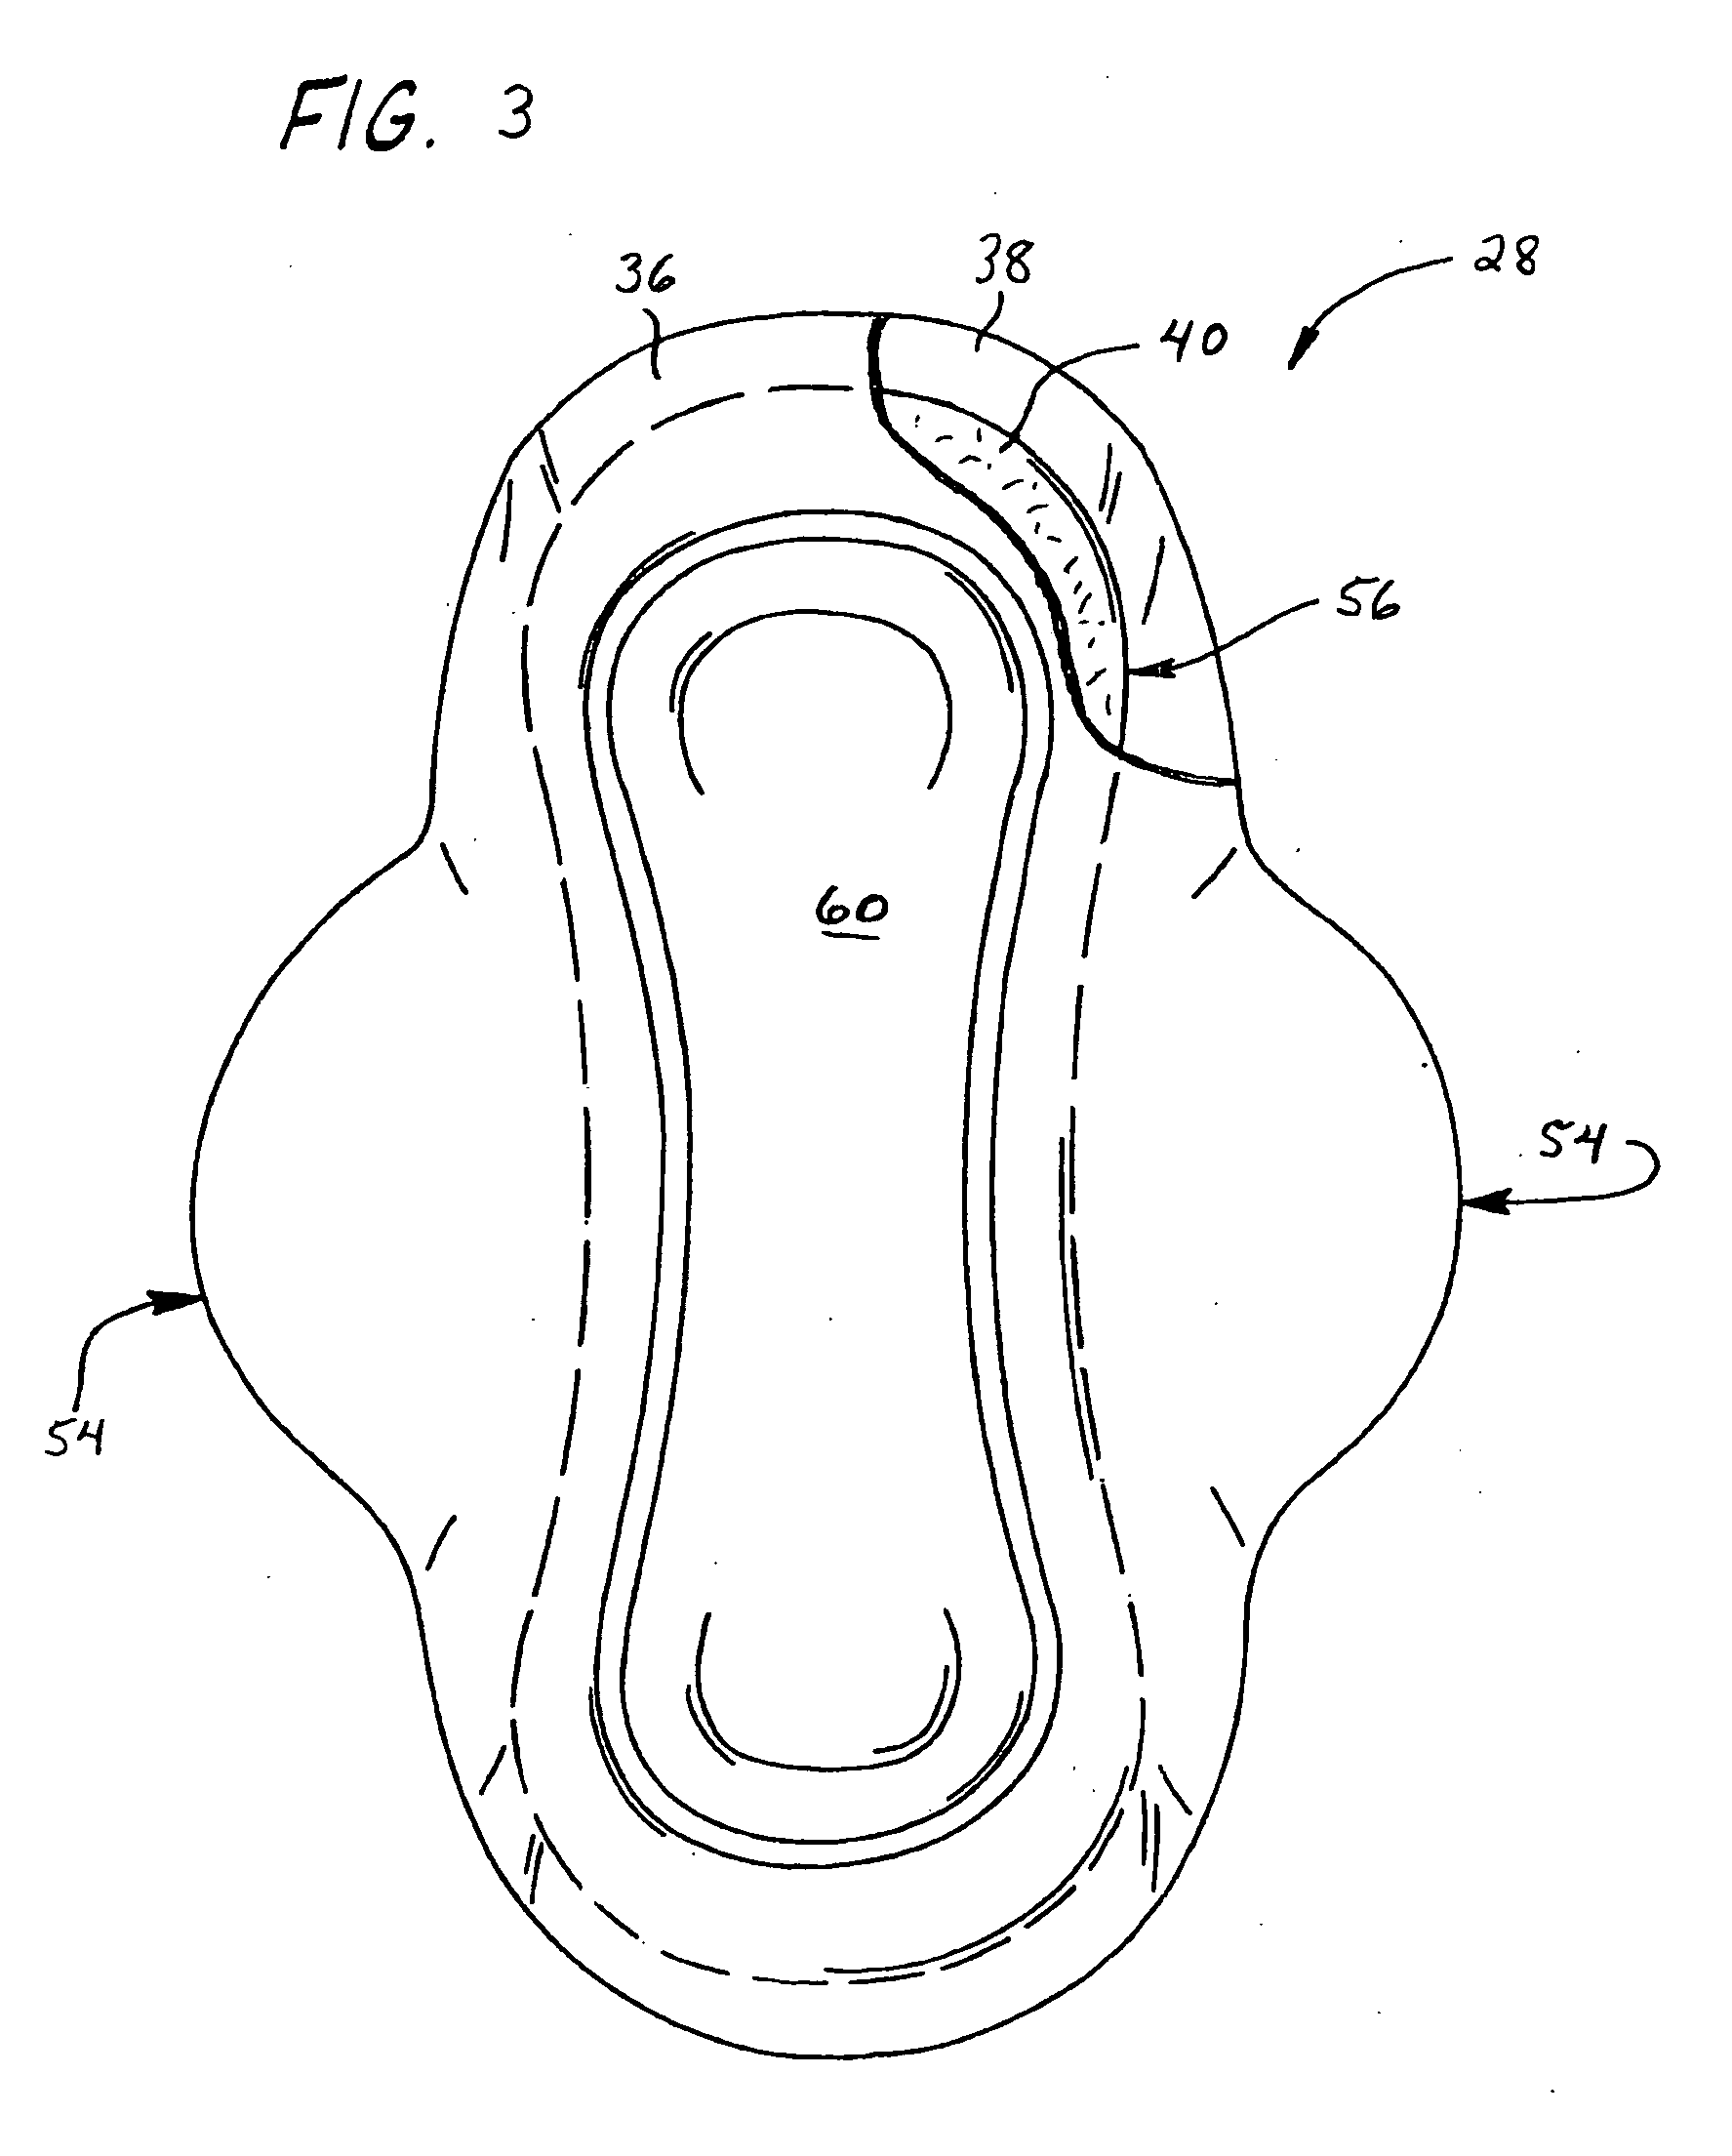 Individual, expandable wrapper for a hygiene product